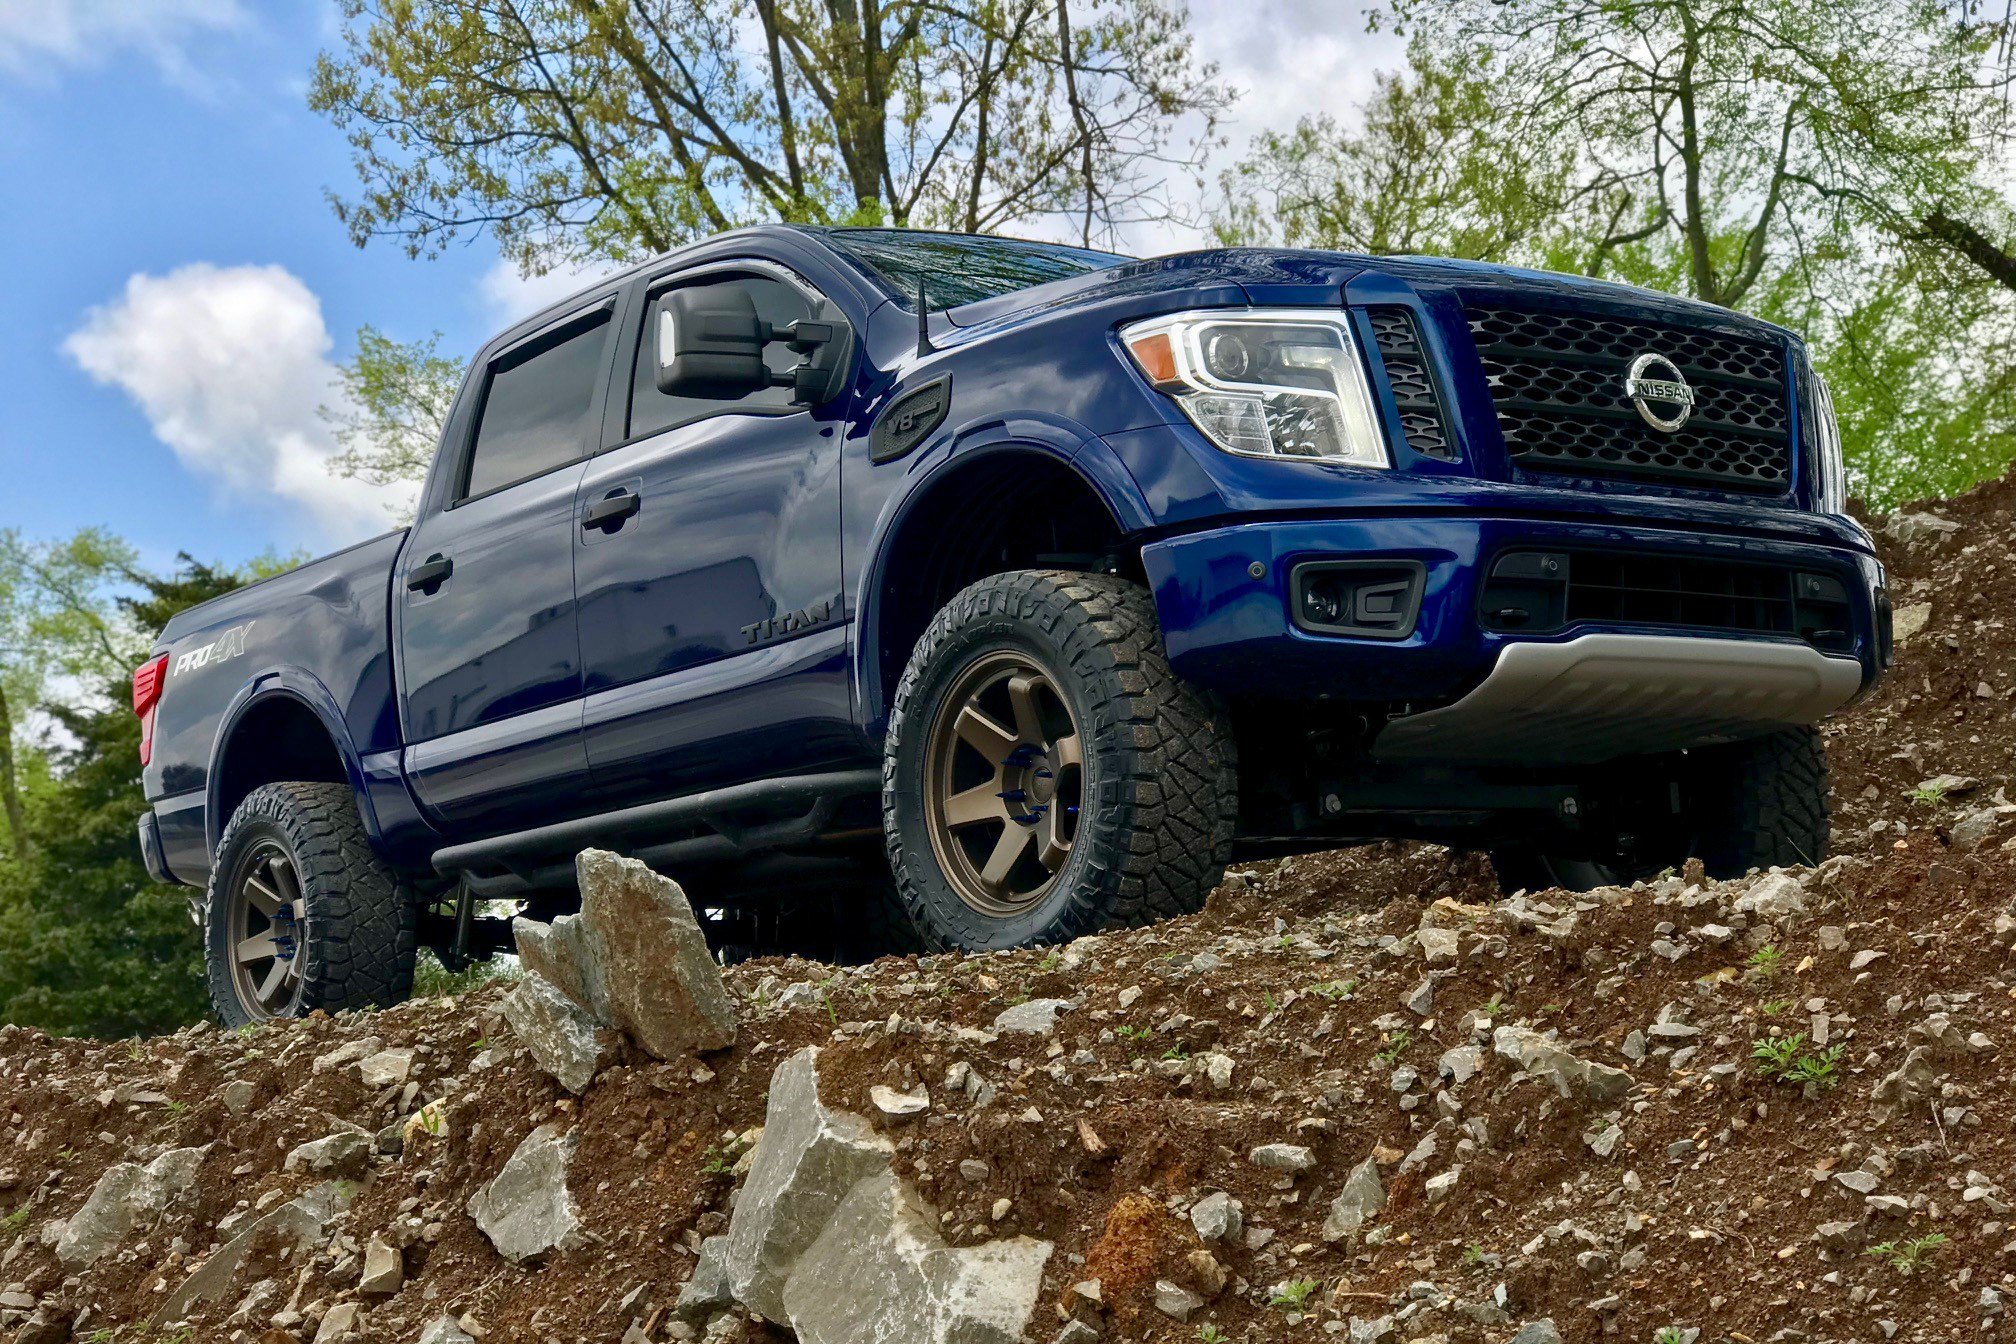 Blue Nissan Titan V8 with Blacked Out Mesh Grille - Photo by Black Rhino Wheels